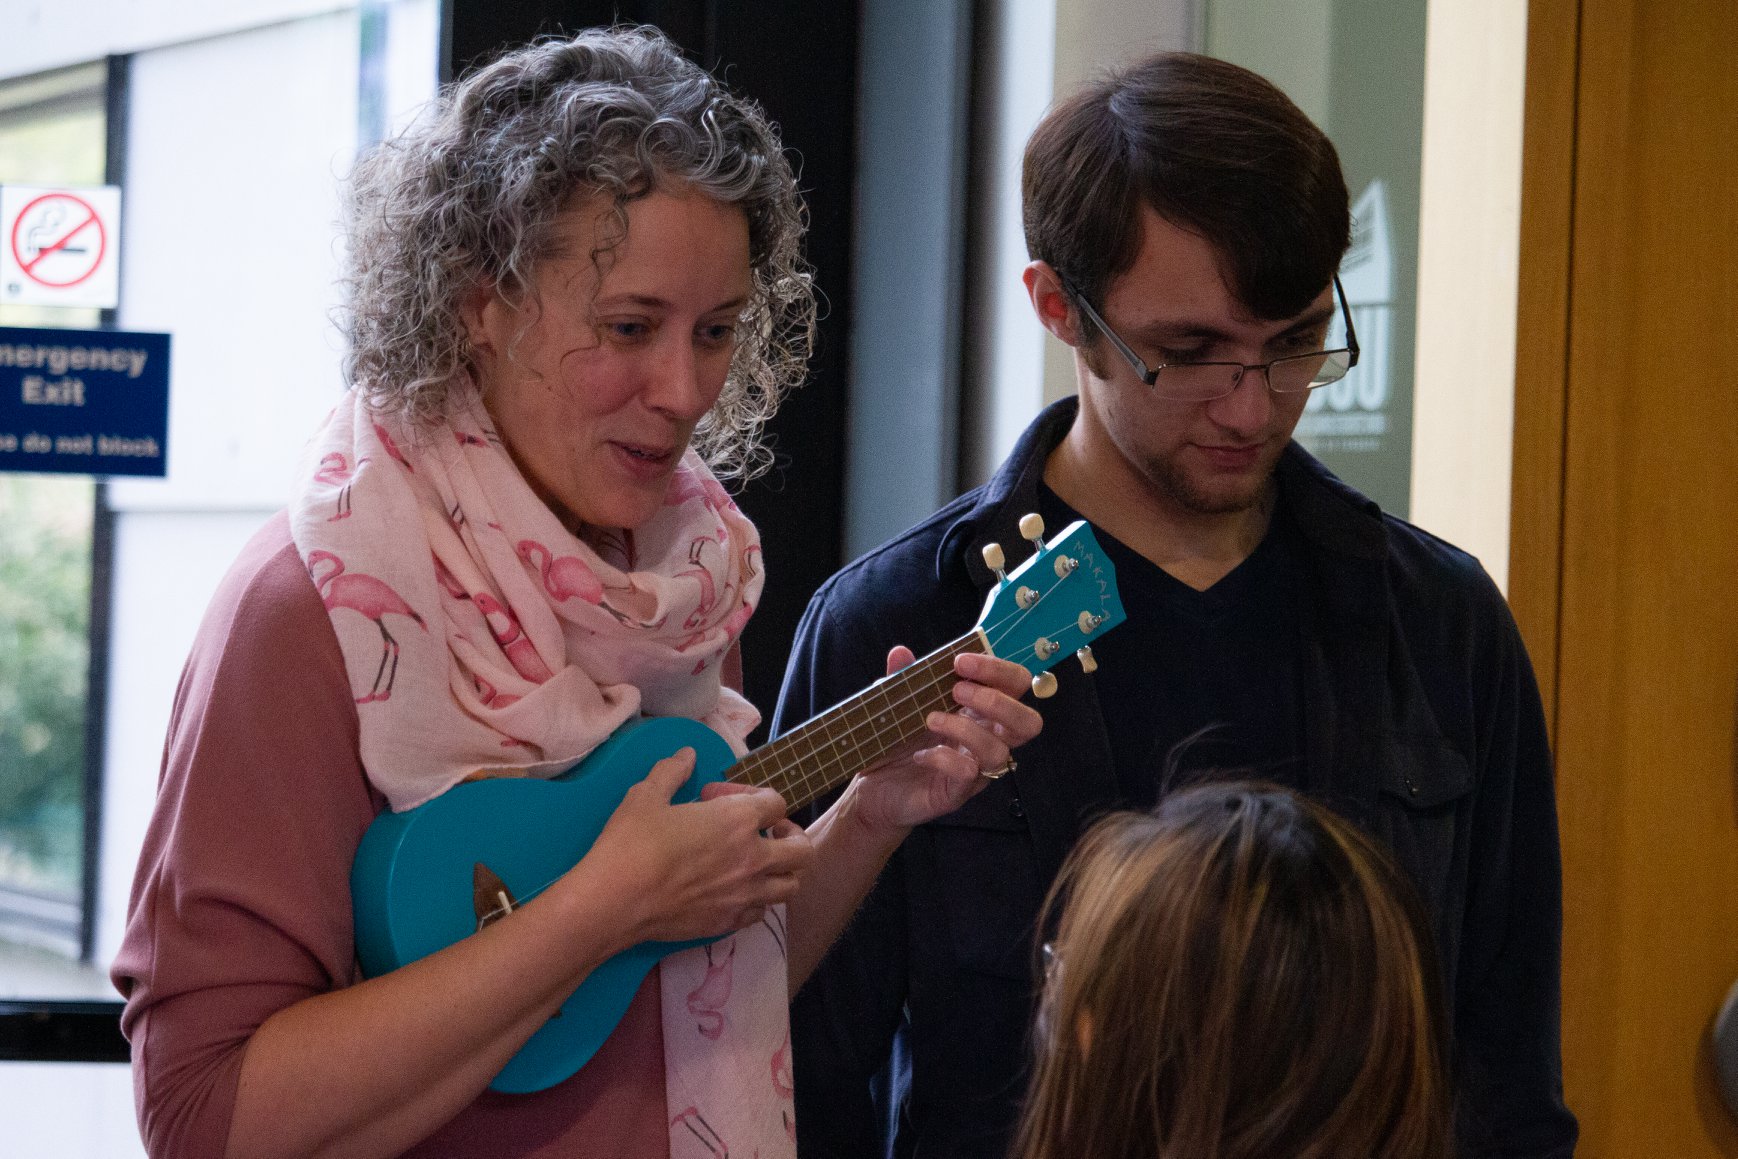 Two facilitators with a ukulele singing along with a participant